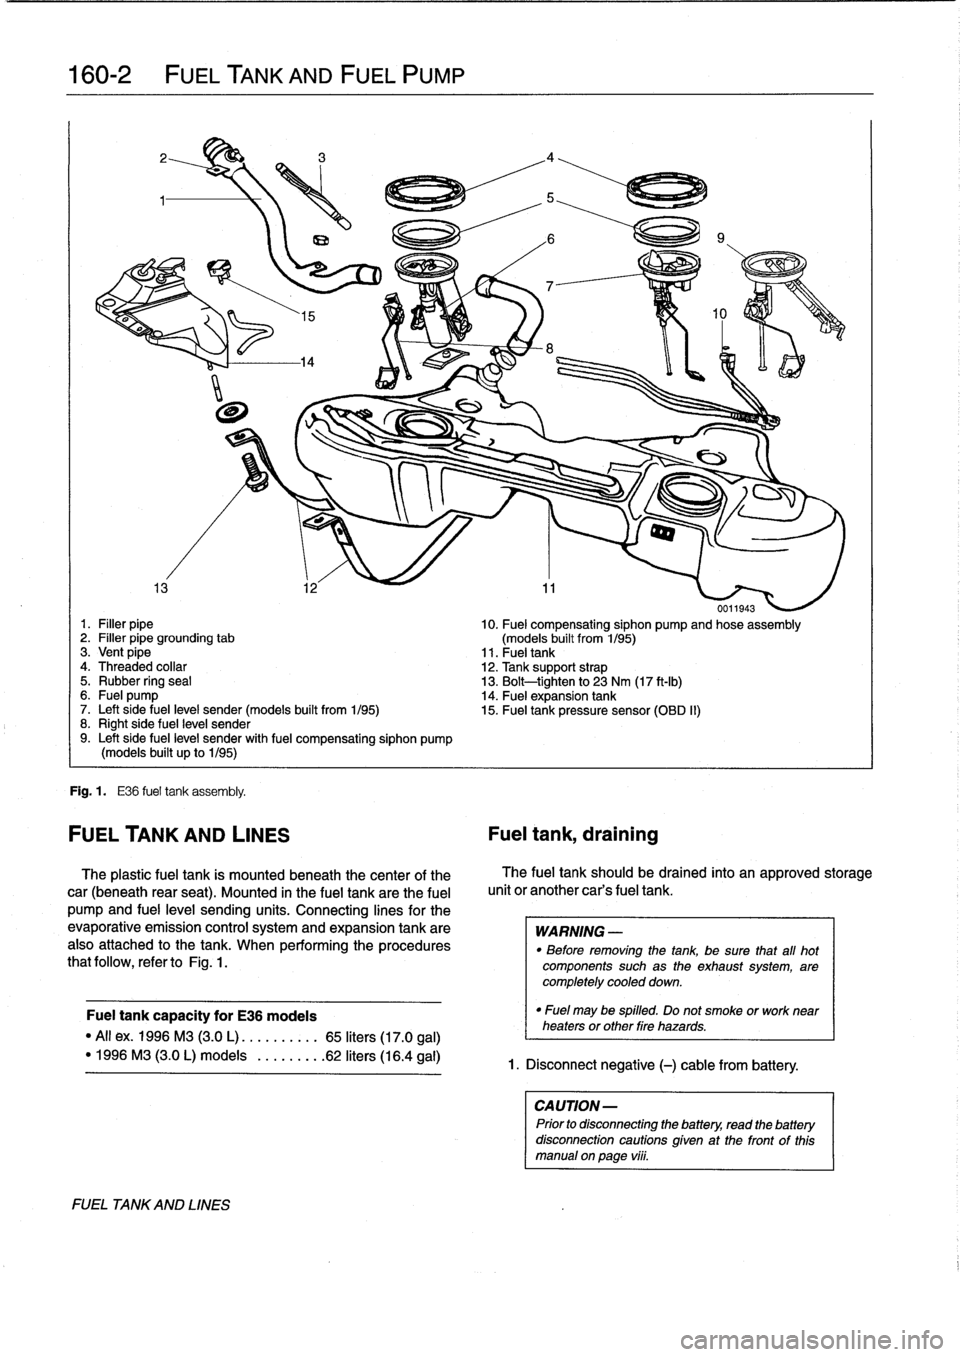 BMW 328i 1995 E36 Workshop Manual 
160-2

	

FUEL
TANK
AND
FUEL
PUMP

0011943
1
.
Filler
pipe

	

10
.
Fuel
compensating
siphon
pump
and
hose
assembly
2
.
Filler
pipe
grounding
tab

	

(models
built
from
1/95)
3
.
Vent
pipe

	

11
.
F